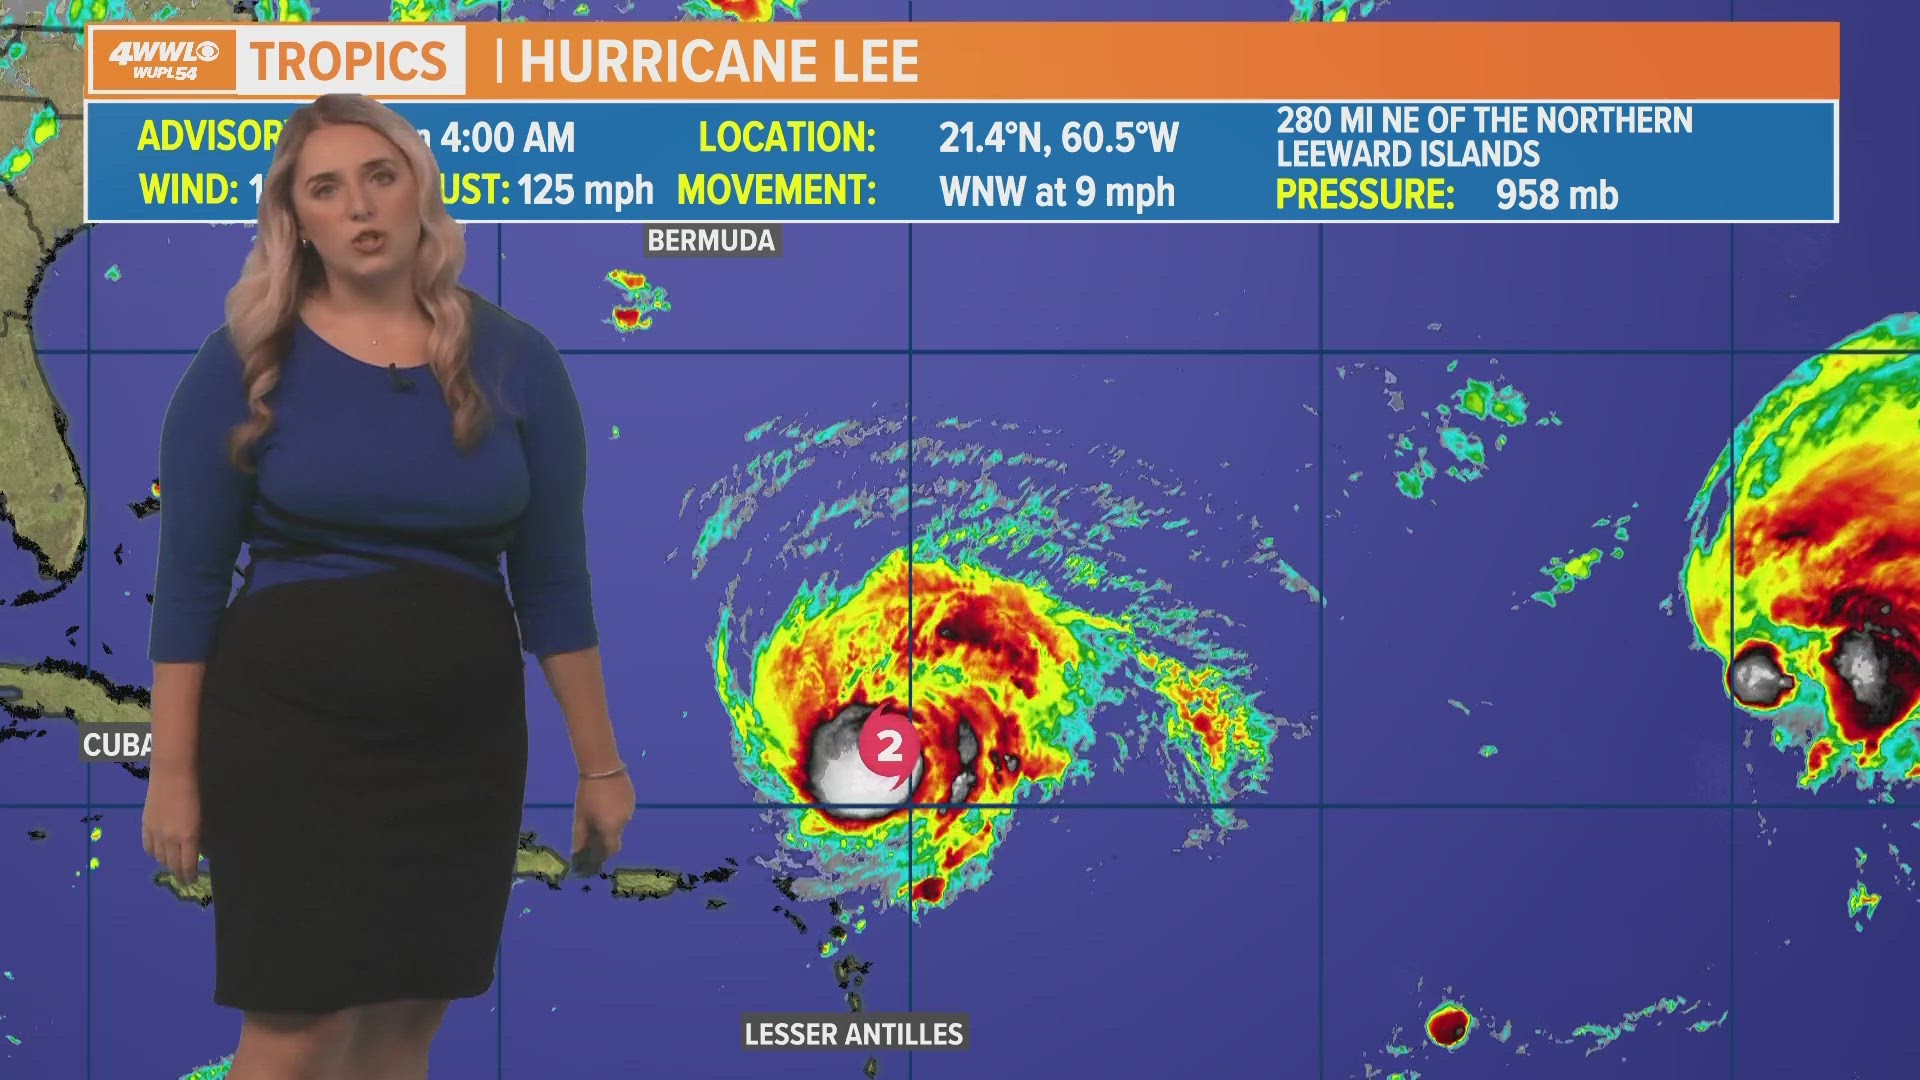 Meteorologist Alexa Trischler says Lee is forecast to slow to a crawl in the Atlantic this week before getting a nudge northward